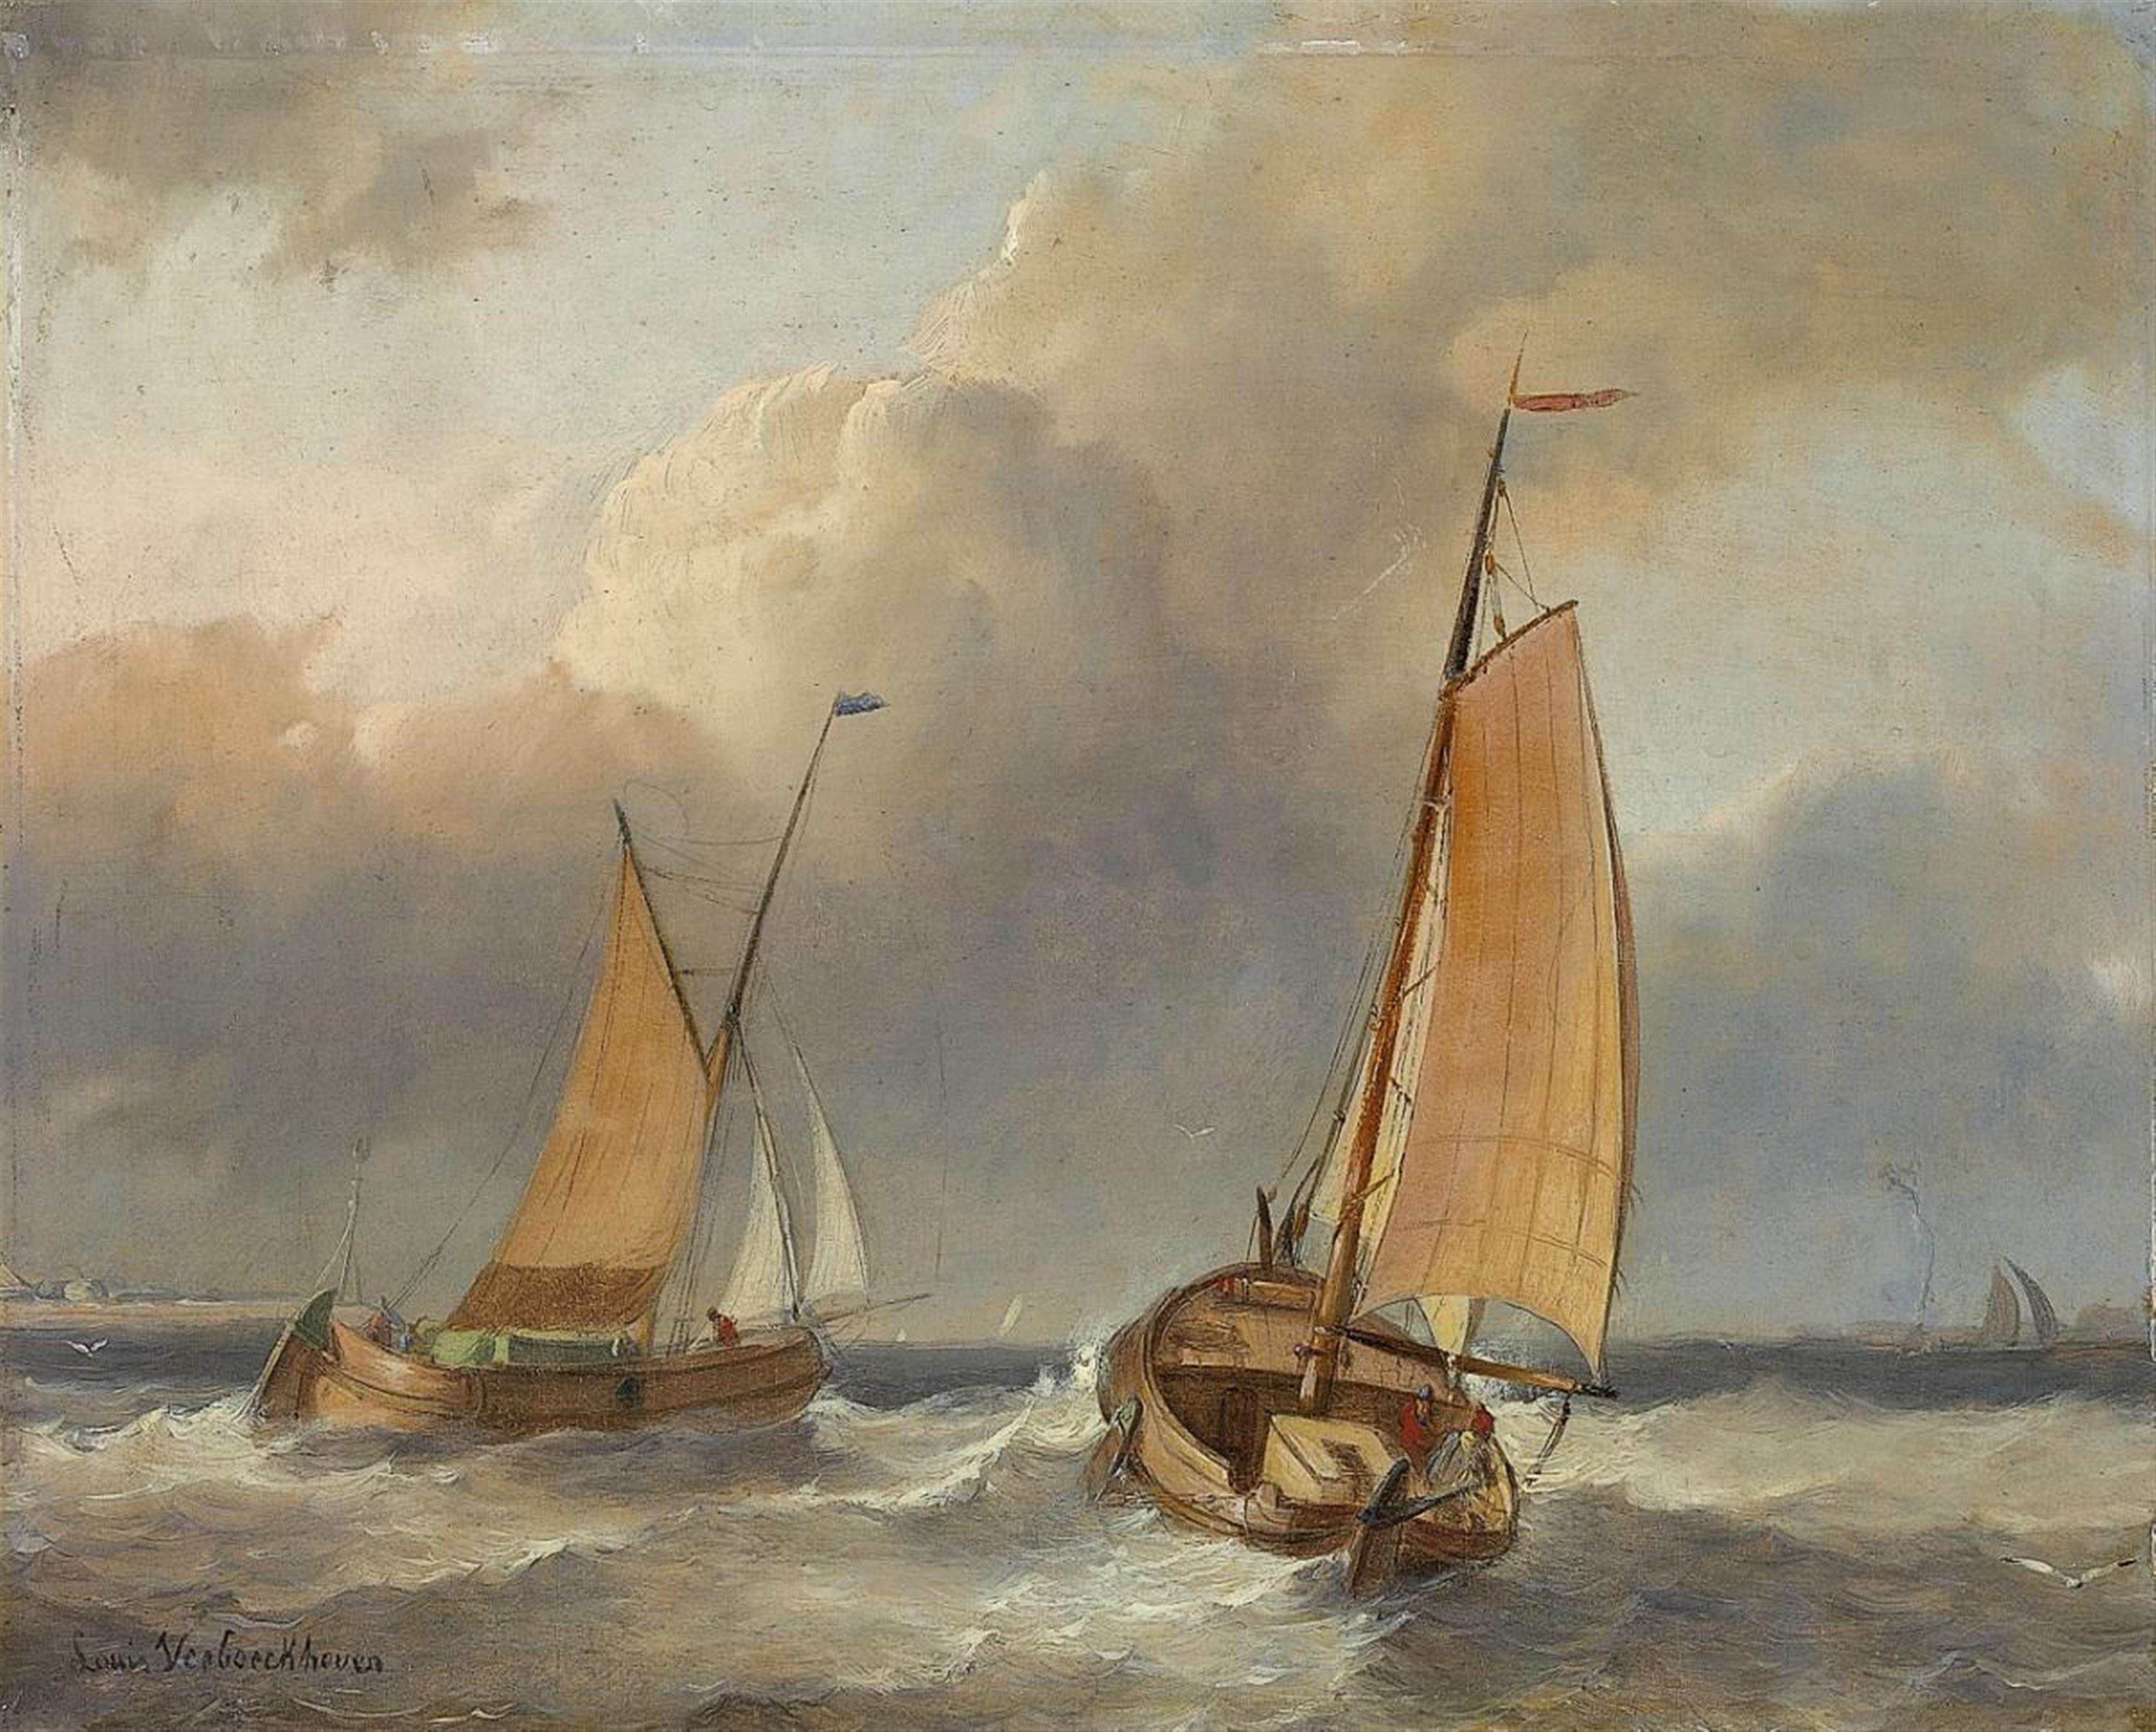 Louis Verboeckhoven - SAILING SHIPS ON STORMY SEA - image-1